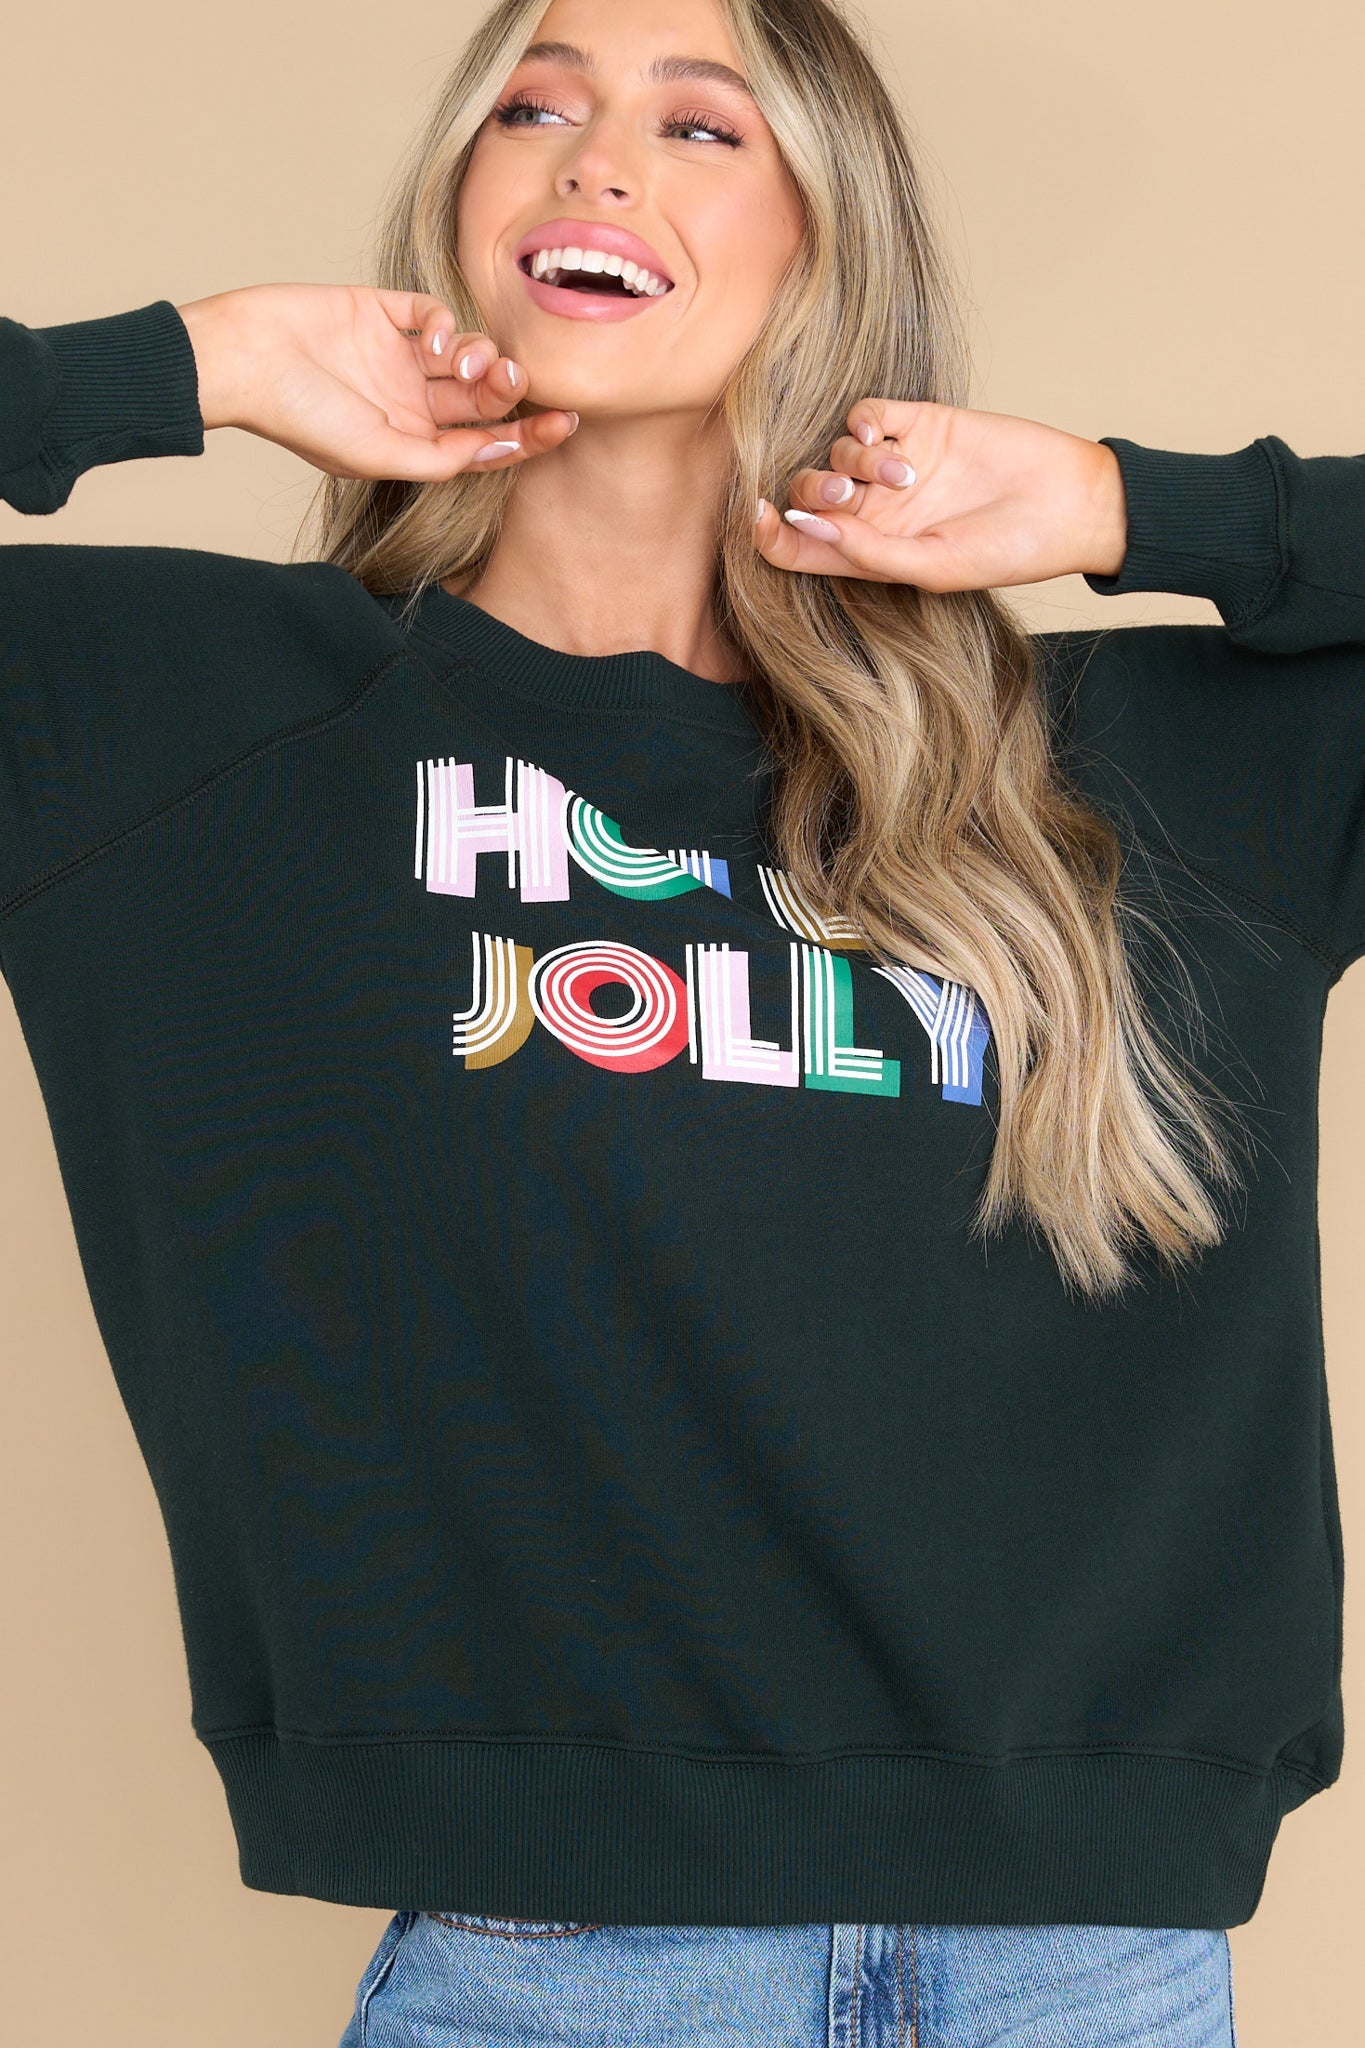 Holly Jolly Scarab Sommers Sweatshirt - Red Dress